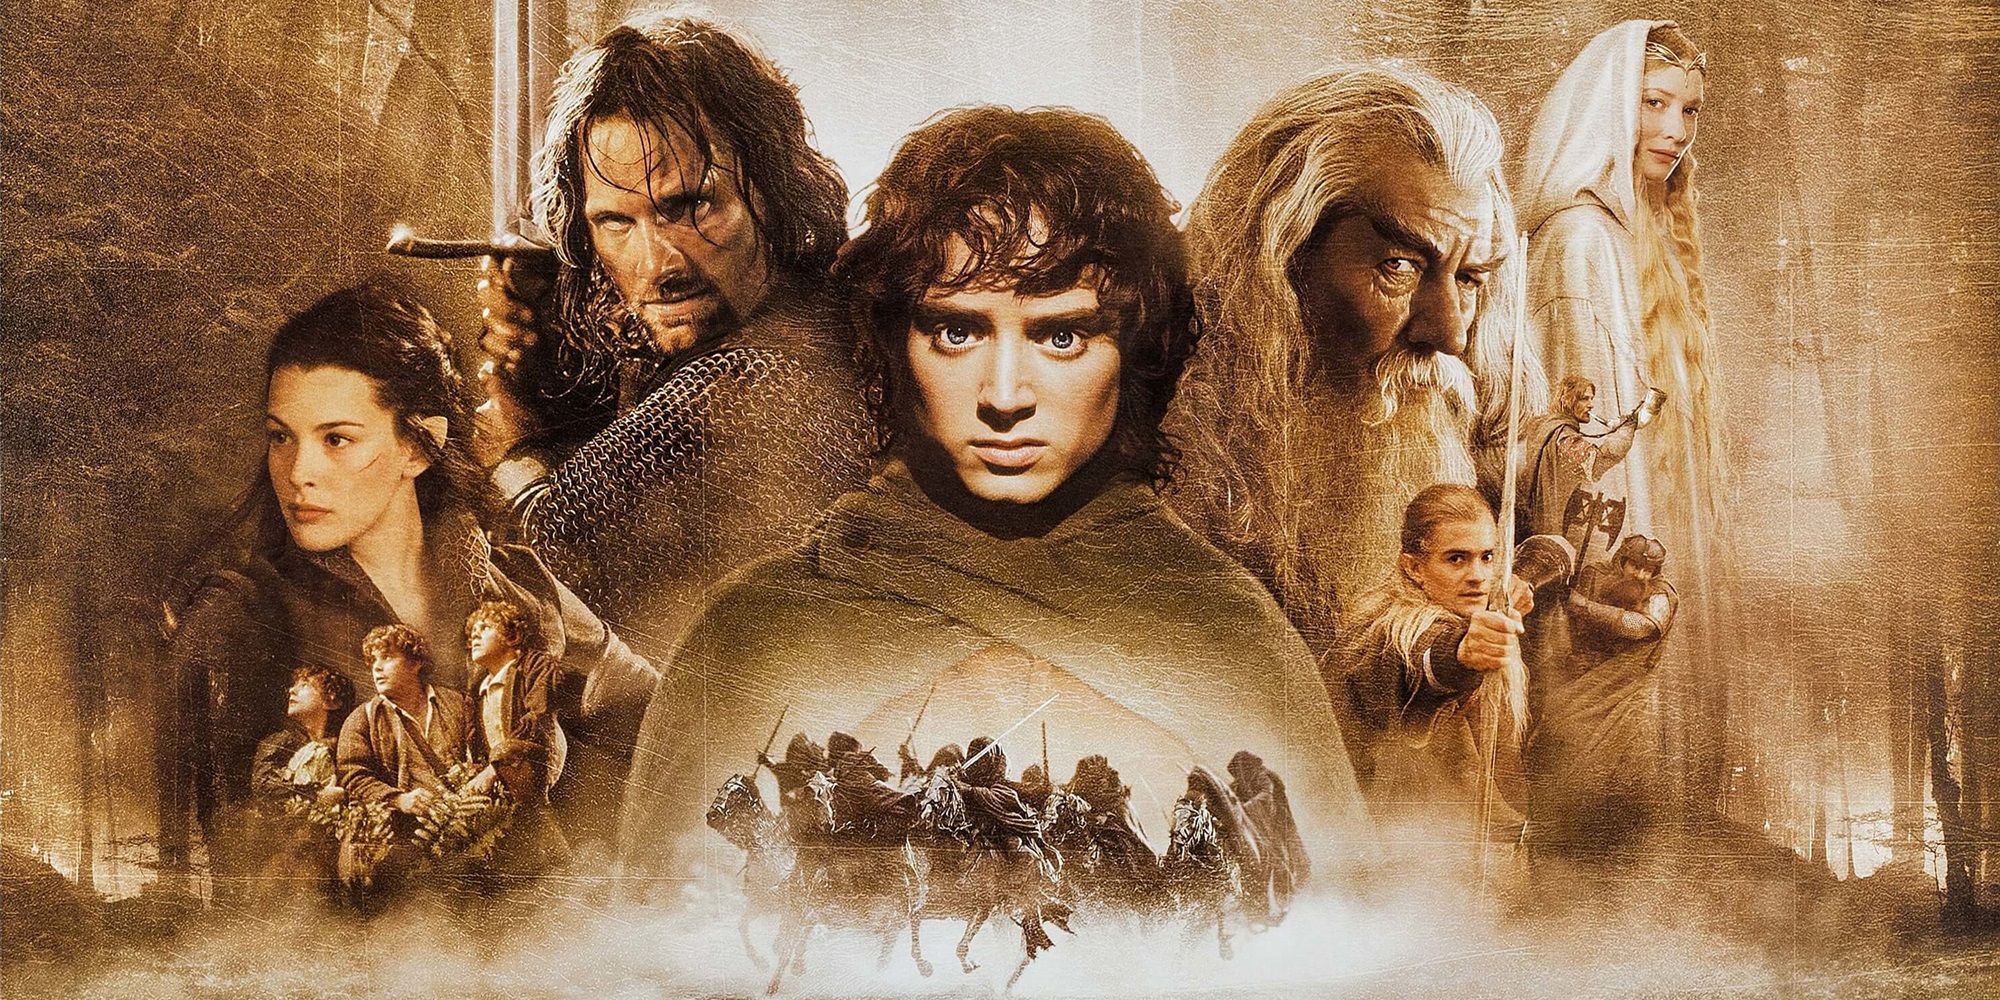 How To Read J.R.R. Tolkien's Lord Of The Rings Books In Order: Chronological & Release Date